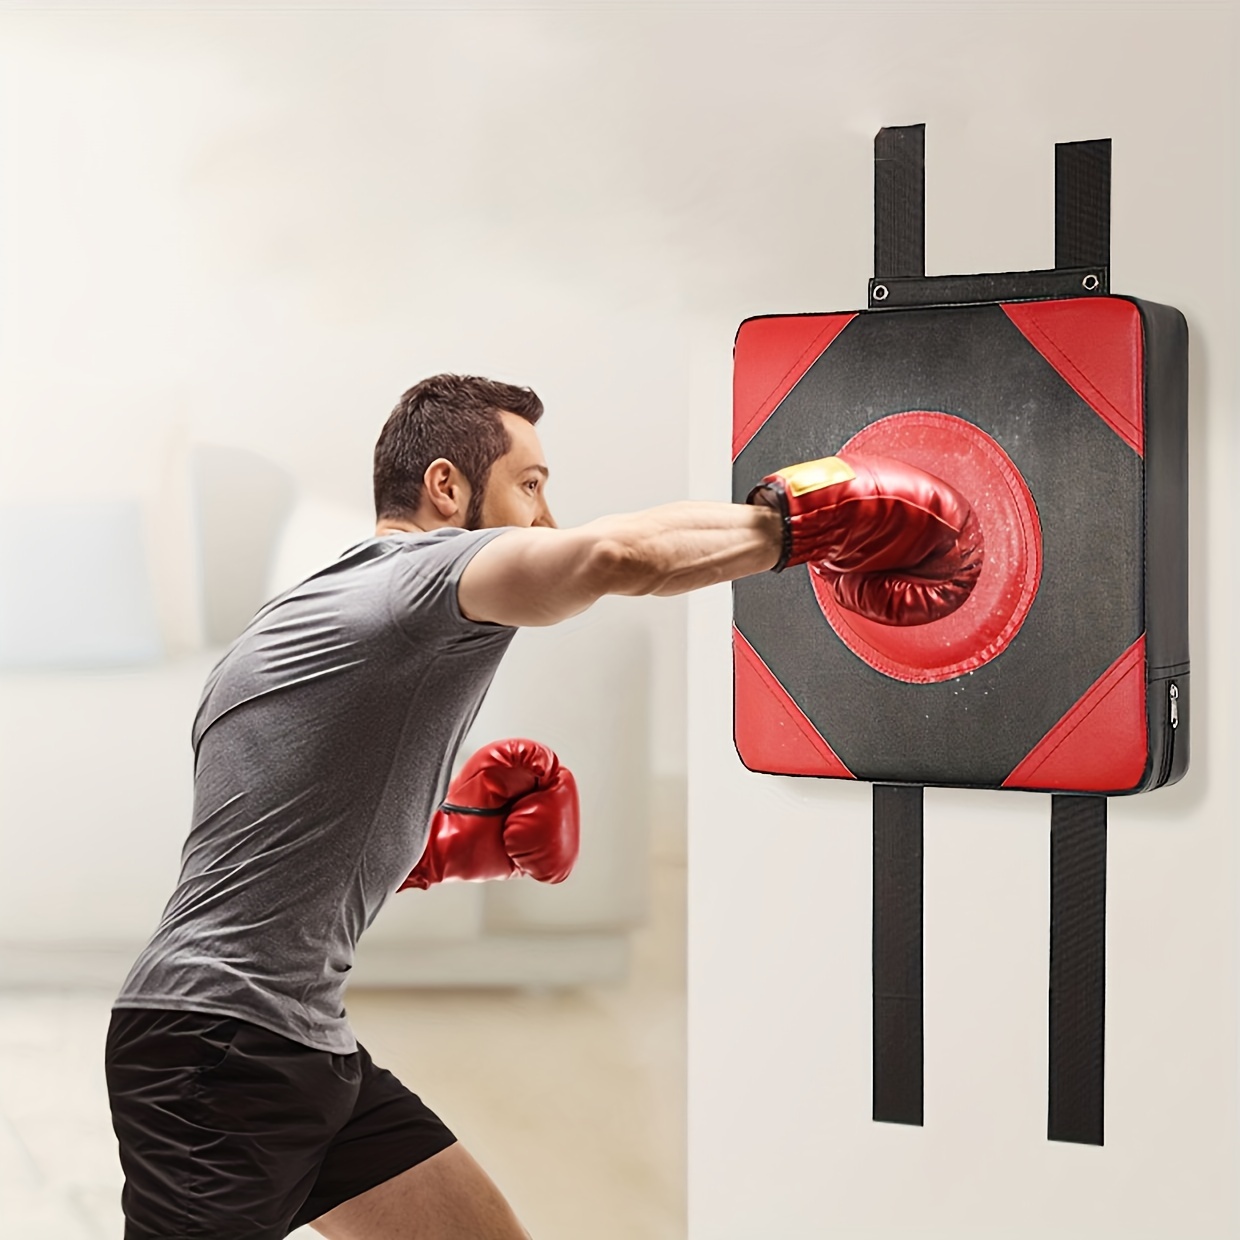 PUNCHING BAG WORKOUT BENEFITS: 18 REASONS TO DO HEAVY-BAG TRAINING - MMA  Factory